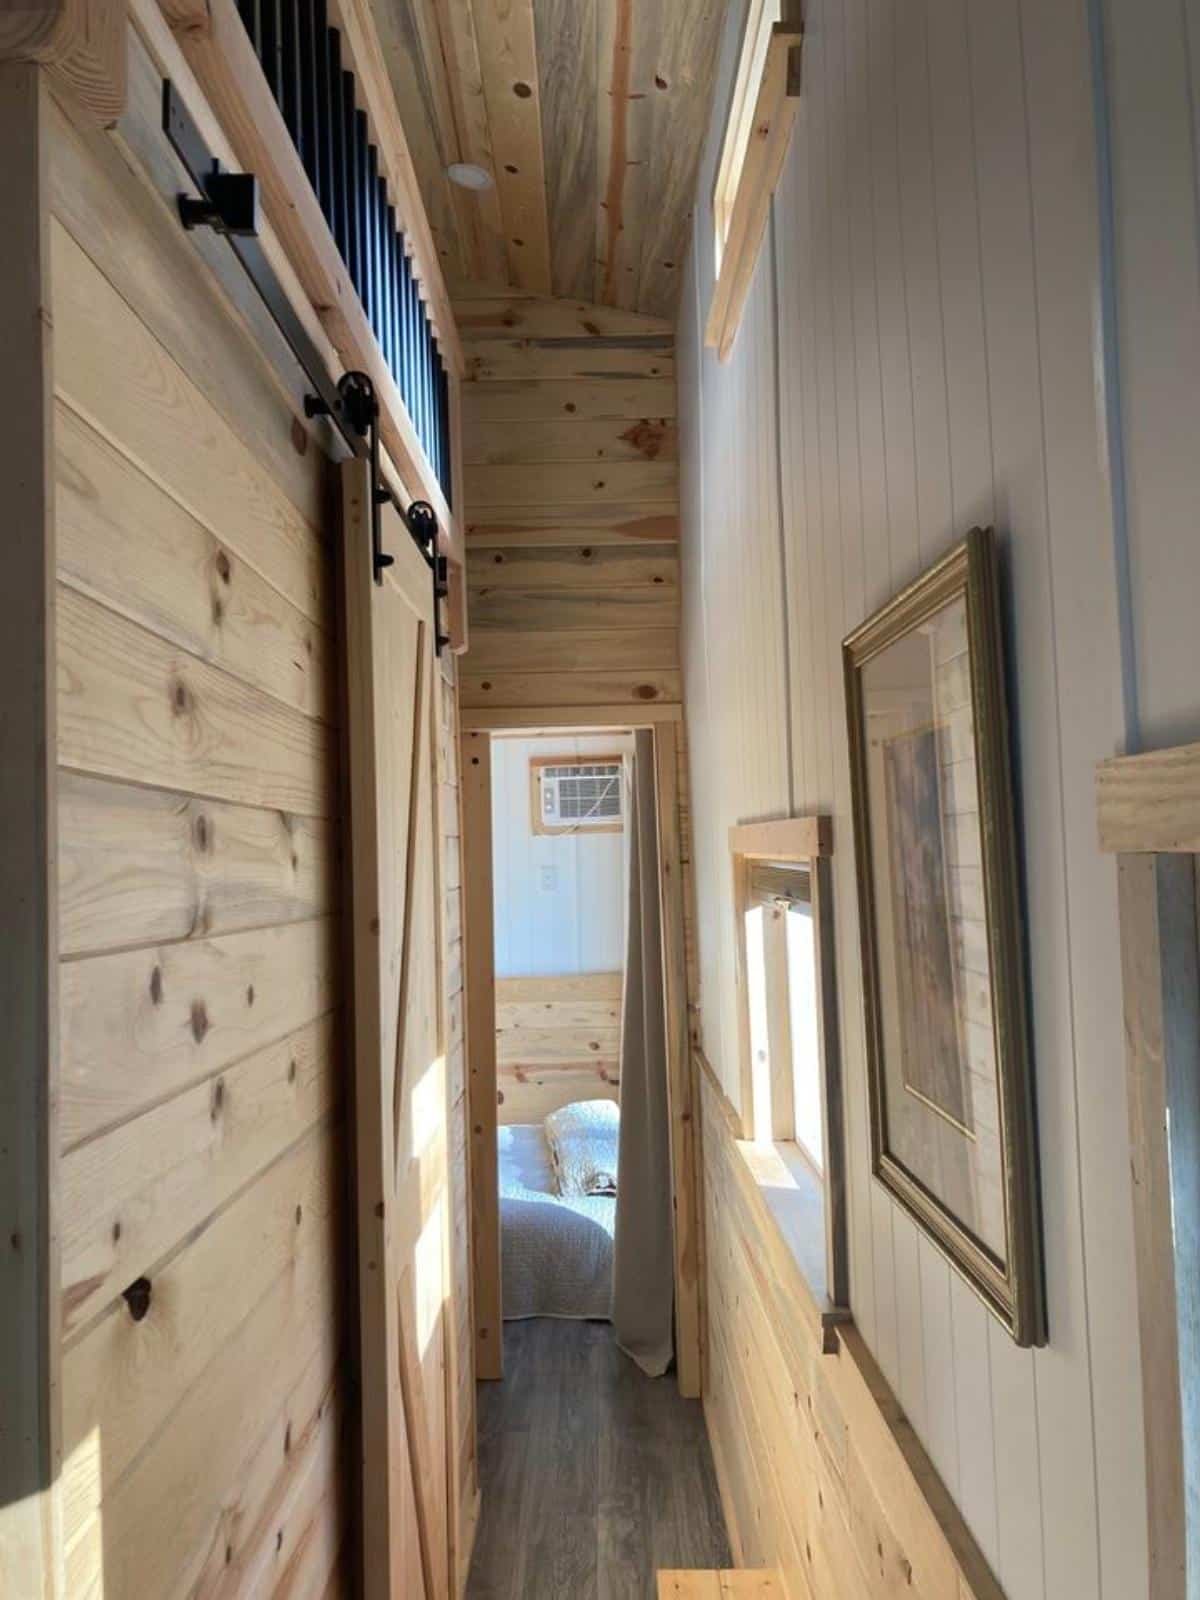 pathway towards the master bedroom of 32’ tiny house on wheels